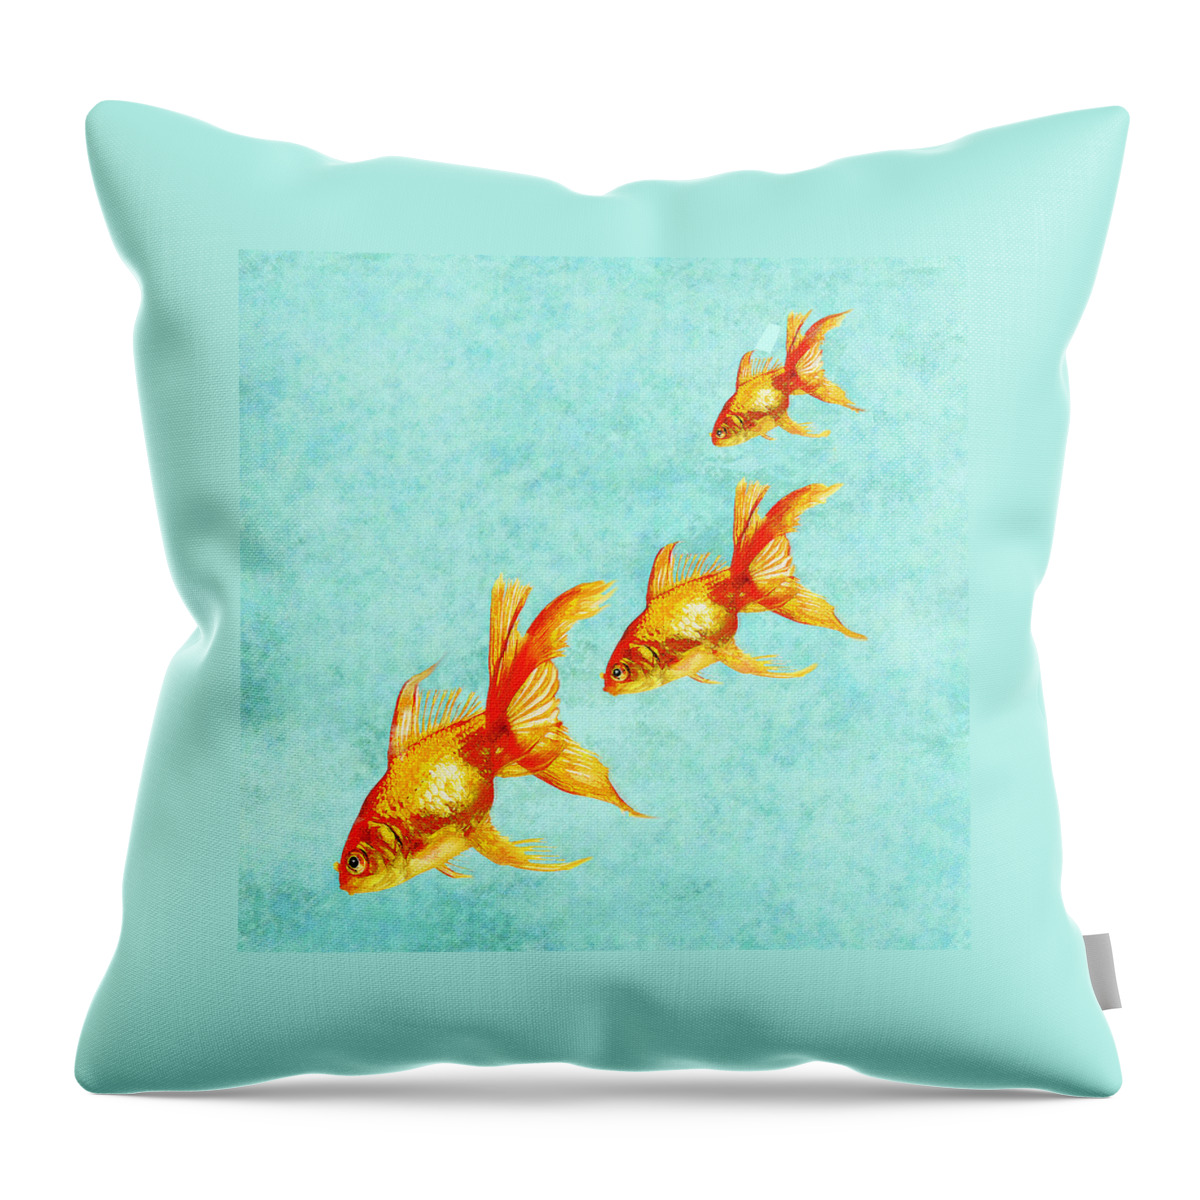 Fish Throw Pillow featuring the digital art Three Little Fishes by Jane Schnetlage